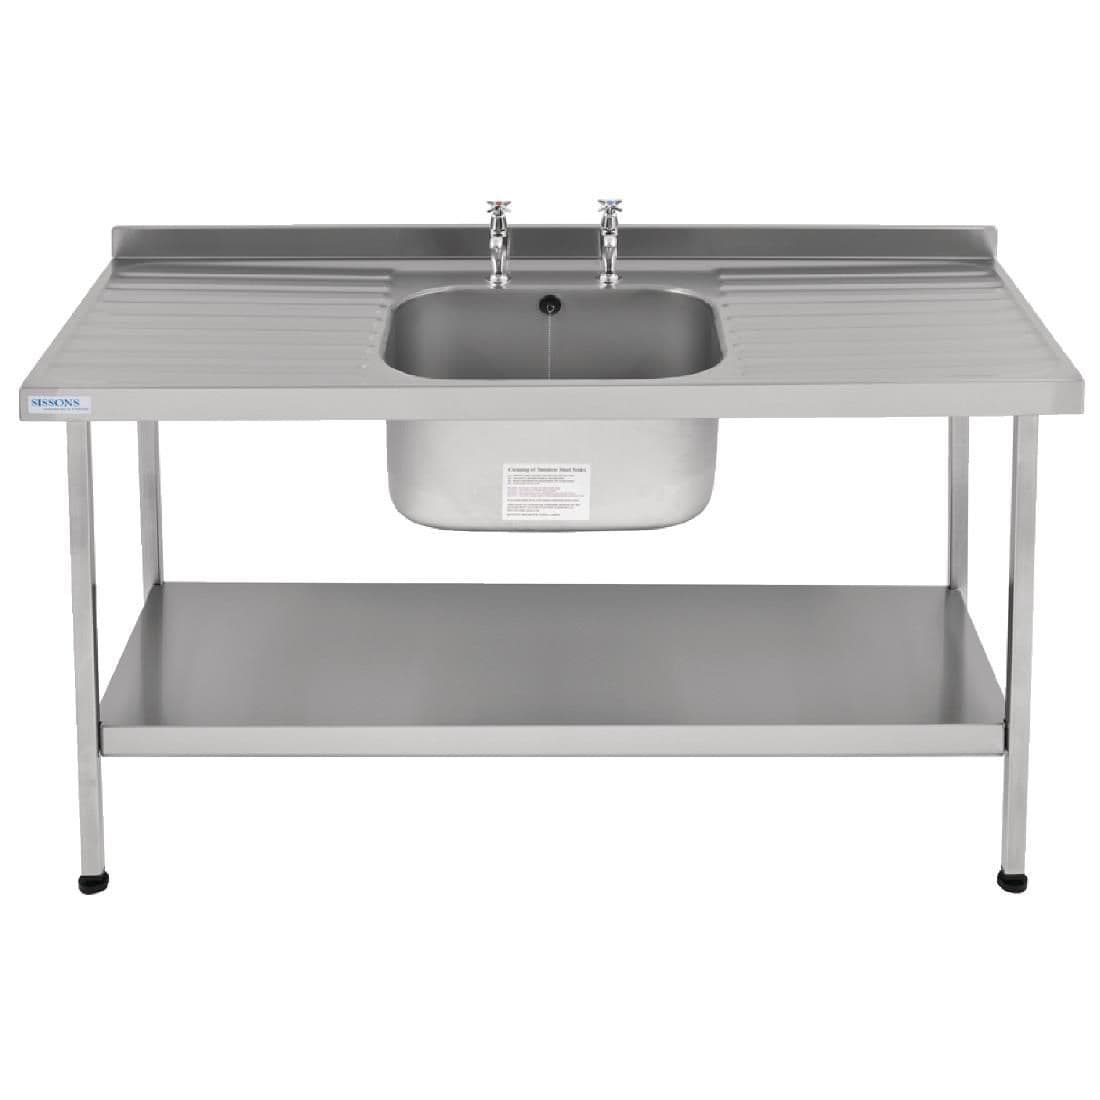 Franke Sissons Self Assembly Stainless Steel Sink Double Drainer 1800x650mm JD Catering Equipment Solutions Ltd